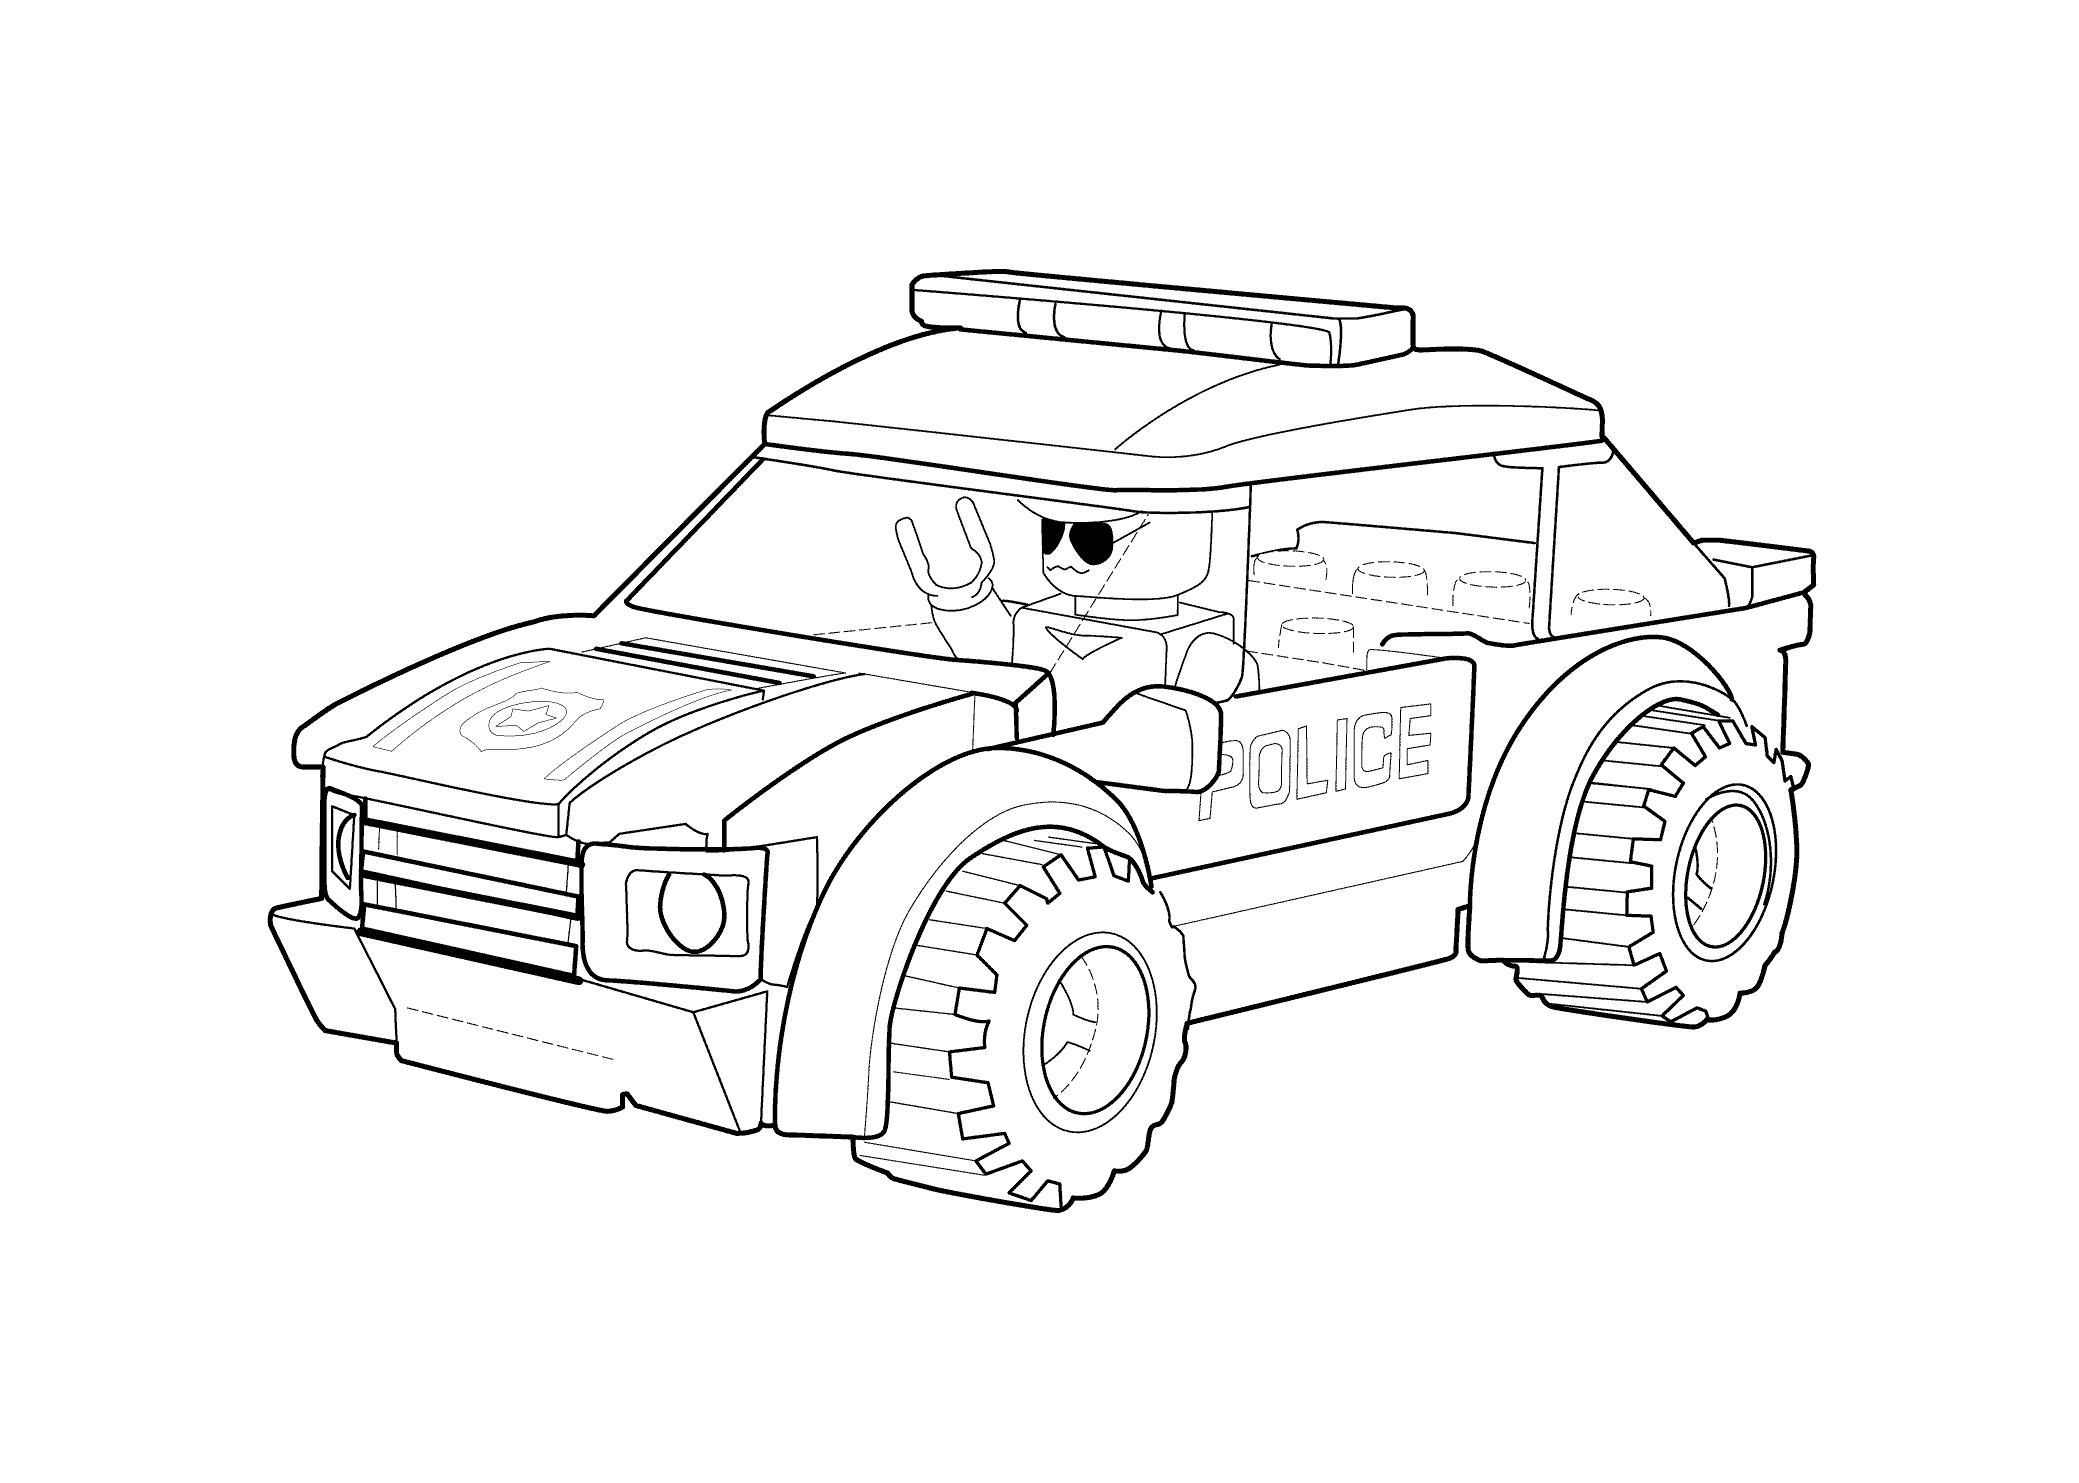 Police Car Printable Coloring Pages - Printable World Holiday